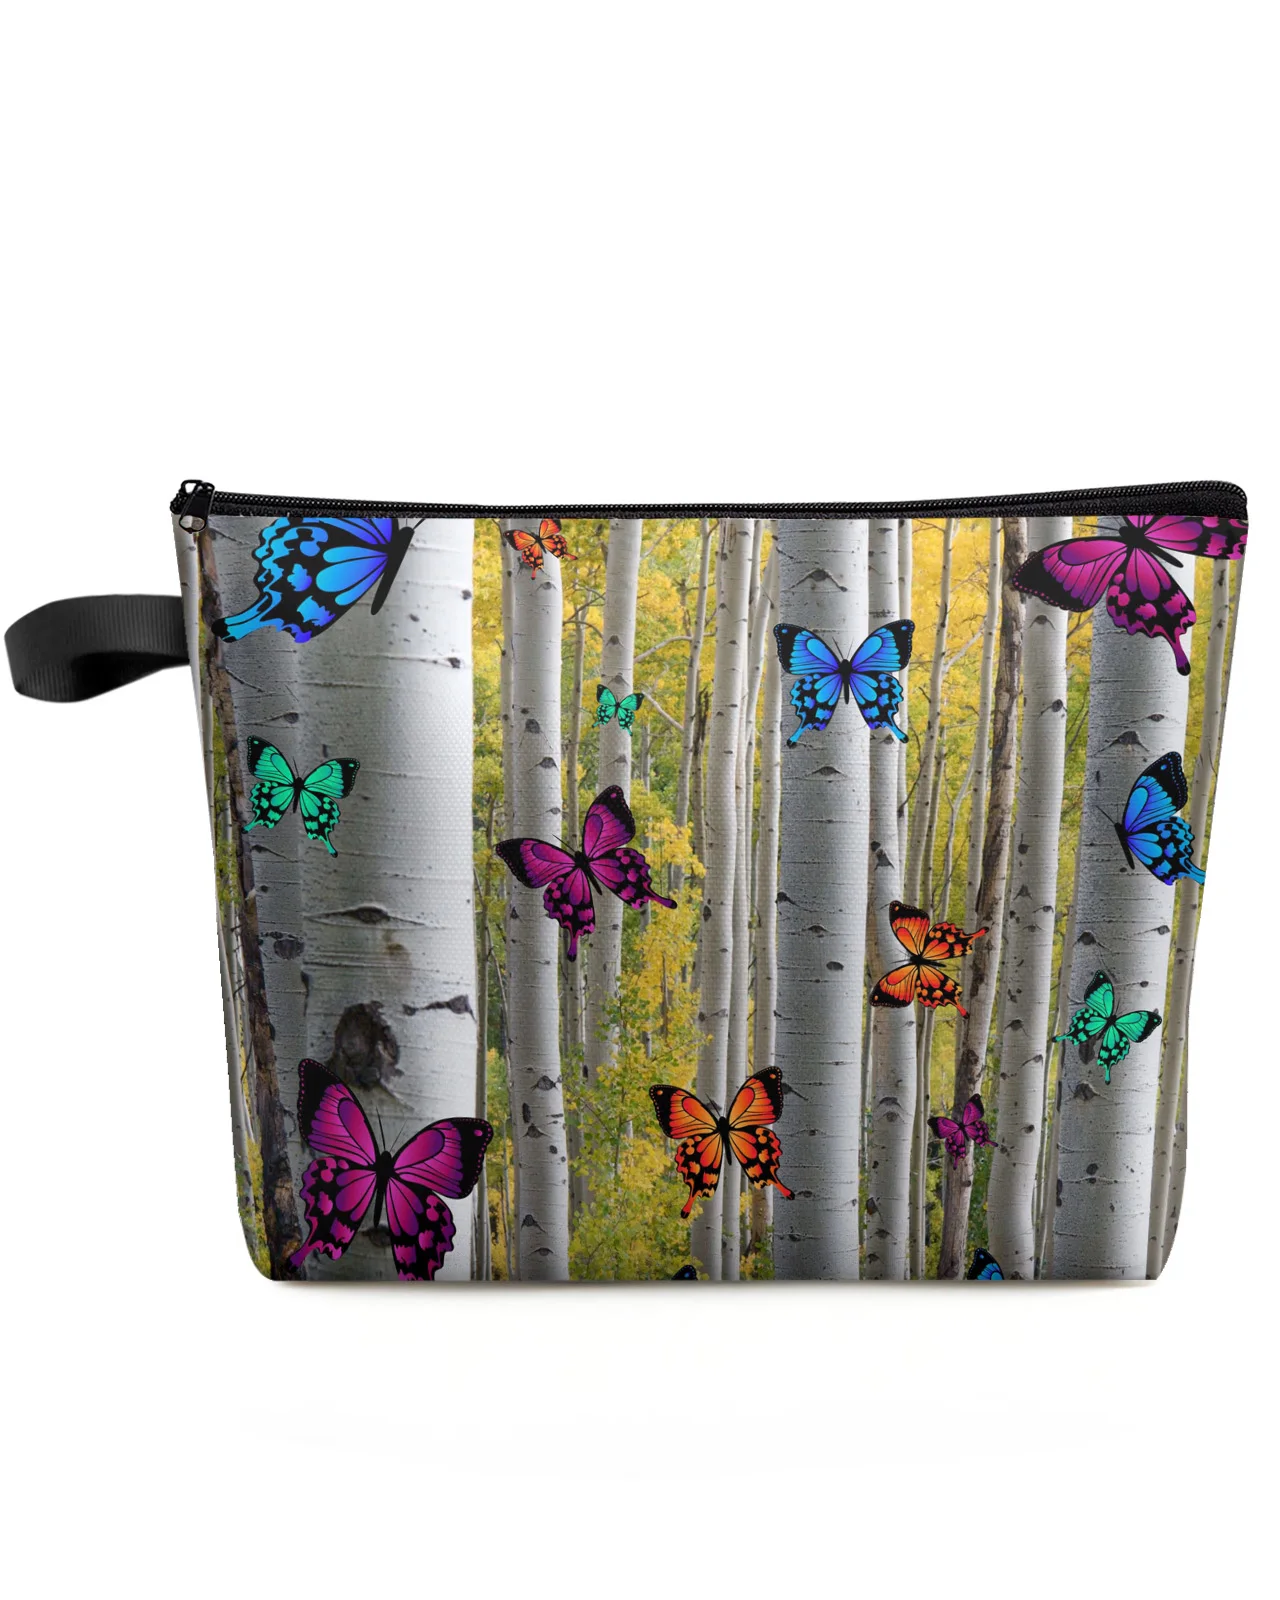 

Color Butterfly Birch Forest Makeup Bag Pouch Travel Essentials Lady Women Cosmetic Bags Toilet Organizer Storage Pencil Case